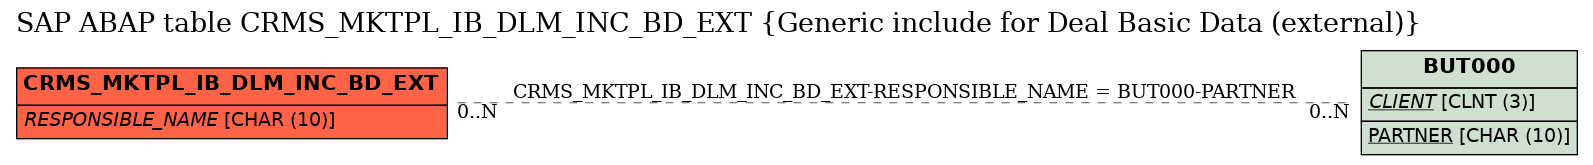 E-R Diagram for table CRMS_MKTPL_IB_DLM_INC_BD_EXT (Generic include for Deal Basic Data (external))